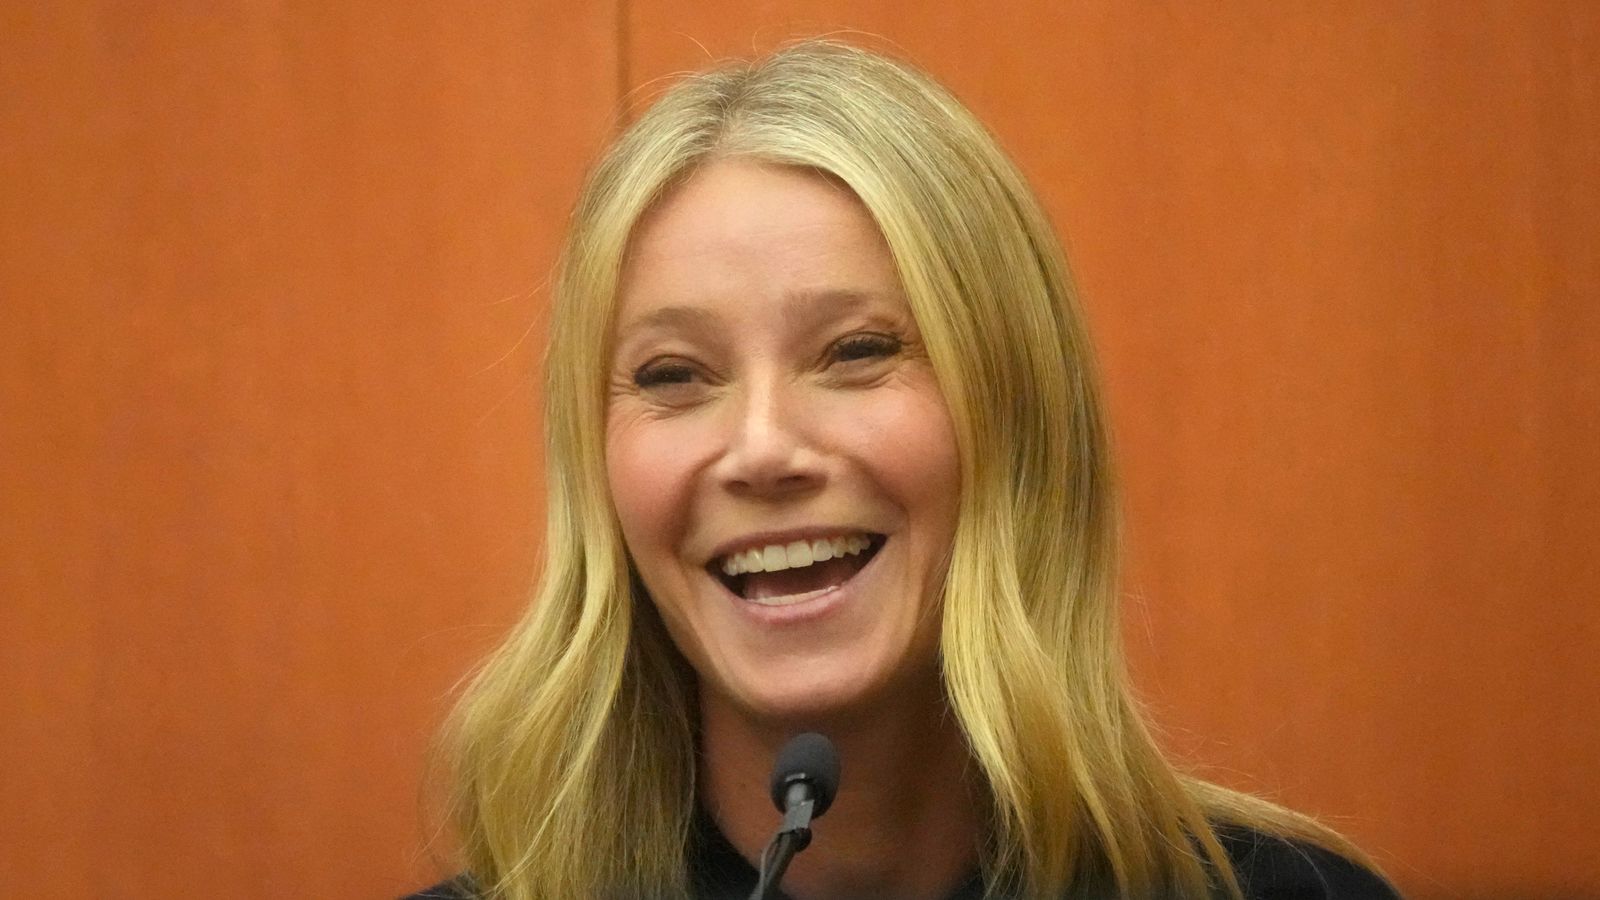 Gwyneth Paltrow wins high-profile civil court case against man who claimed she crashed into him while skiing